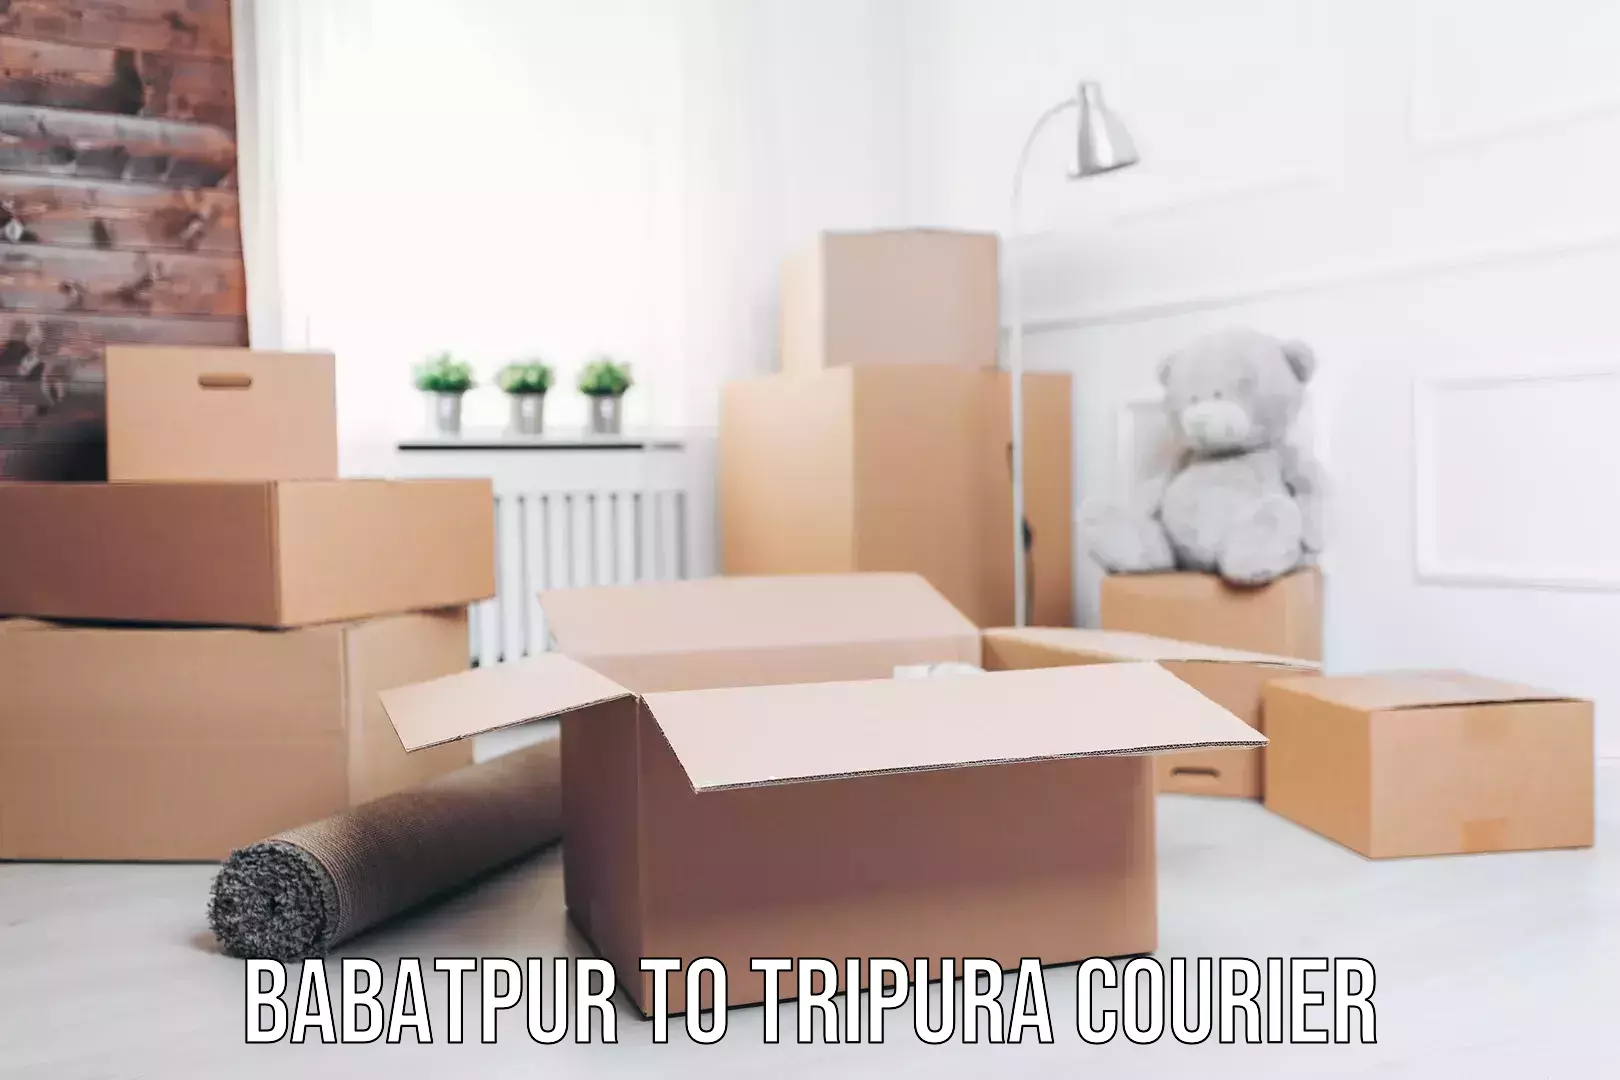 Efficient package consolidation Babatpur to Tripura